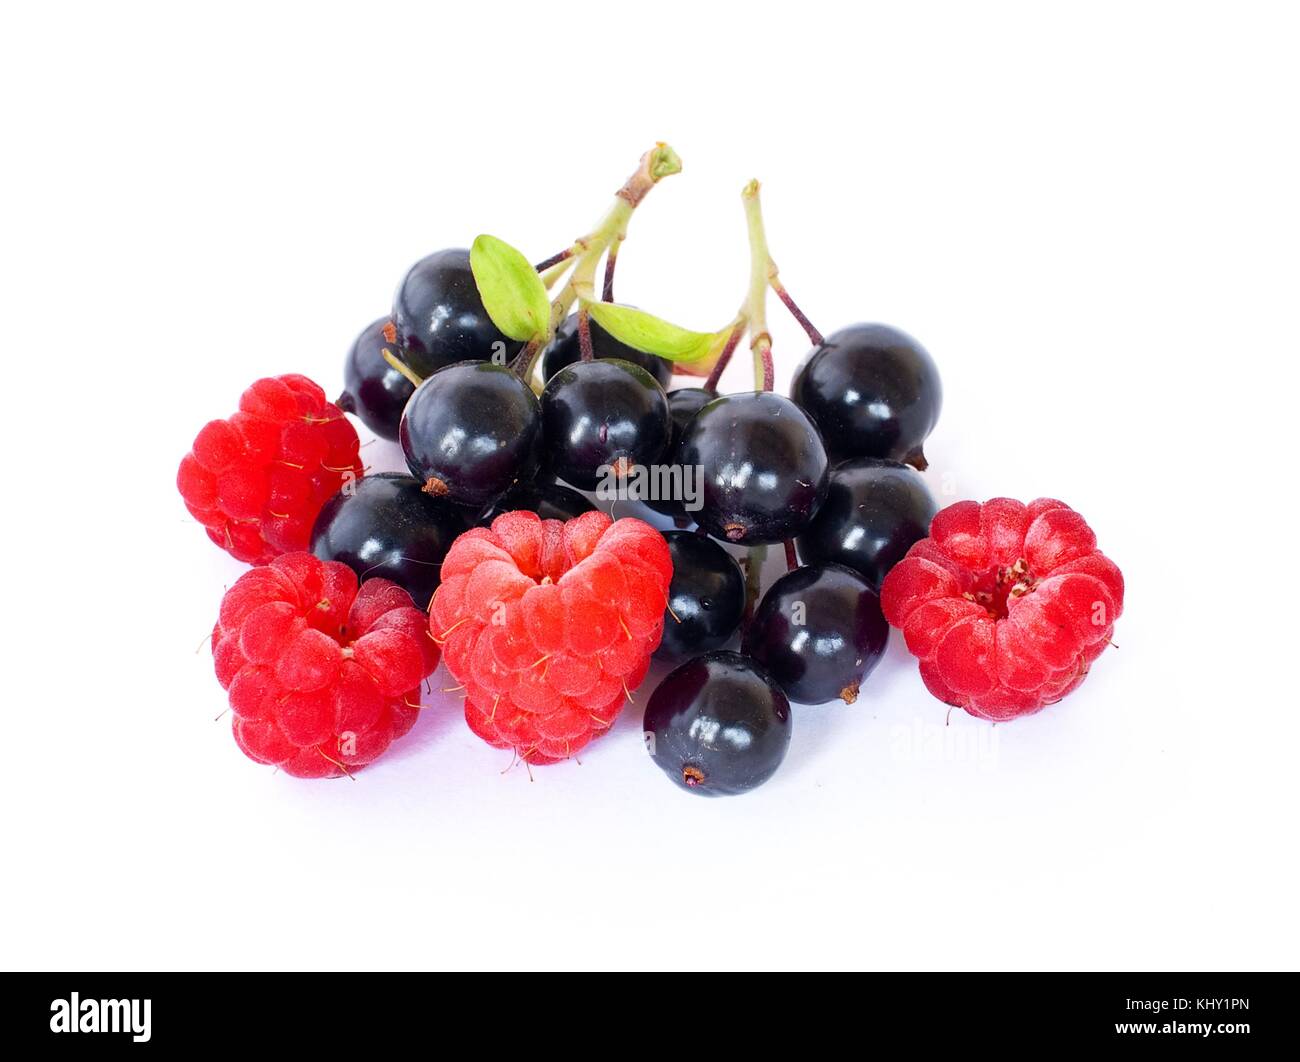 Black currant and raspberry on white background. Stock Photo